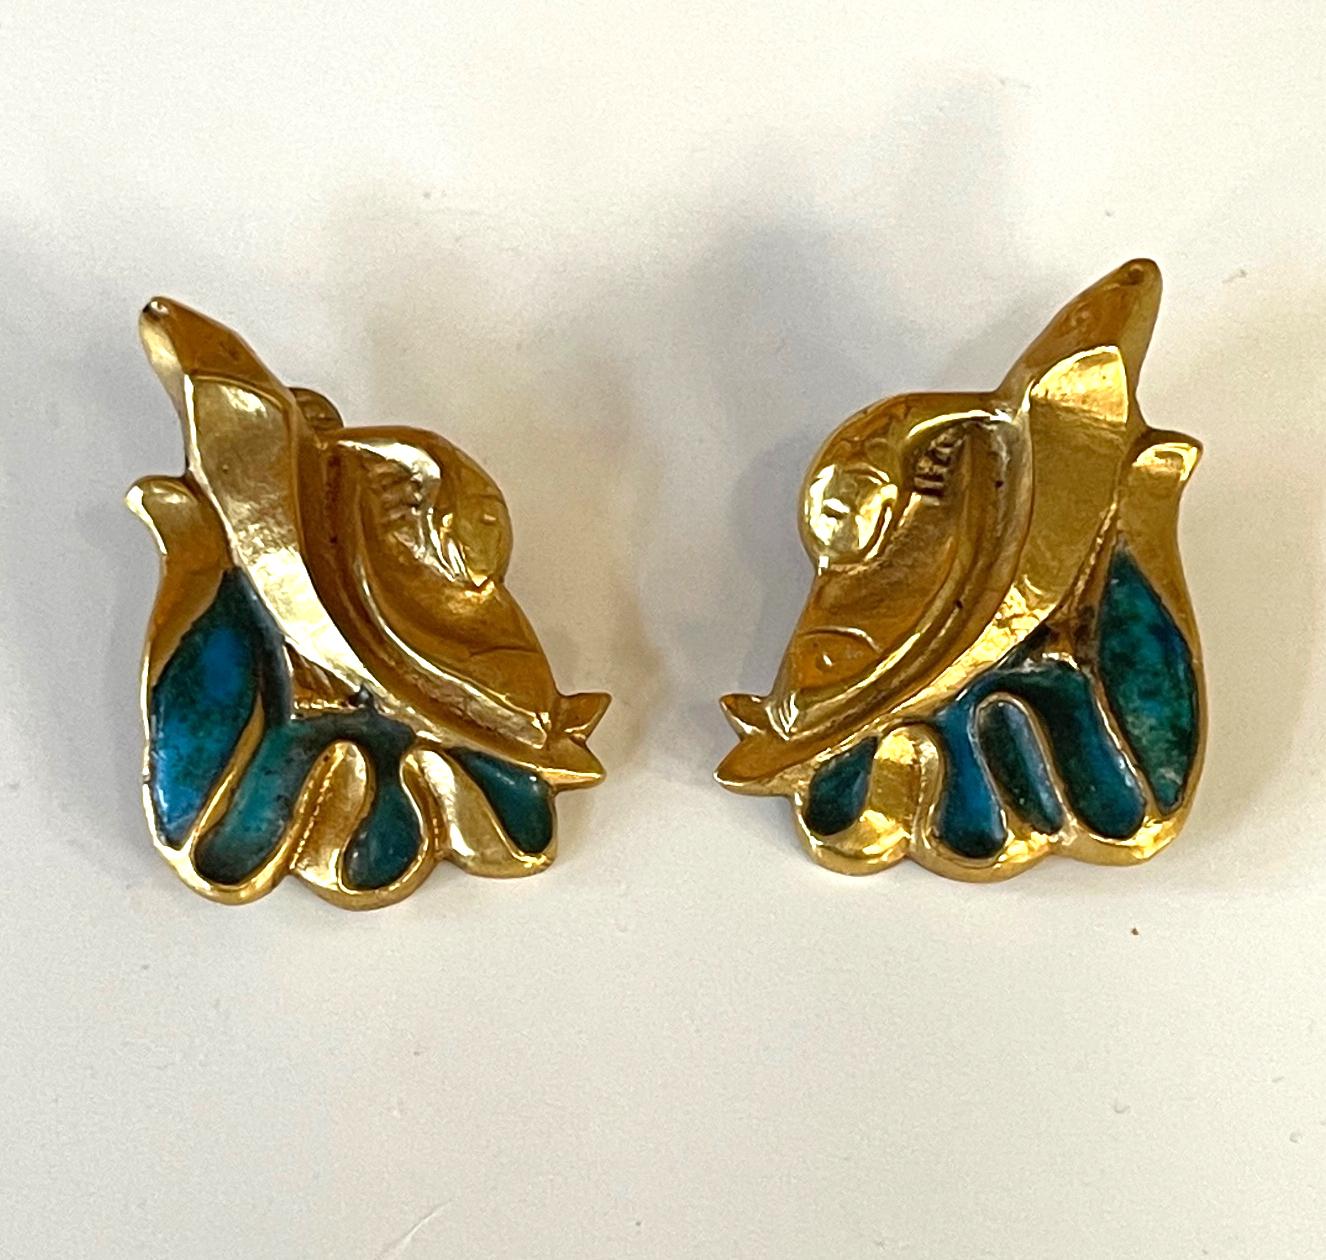 A pair of bespoken earrings by French Art Jeweler Line Vautrin (1913-1997). The cast bronze earring features a sculptural design that evokes an archaic form with shell like scroll and wing-like spread decorated with a turquoise enamel surface. They